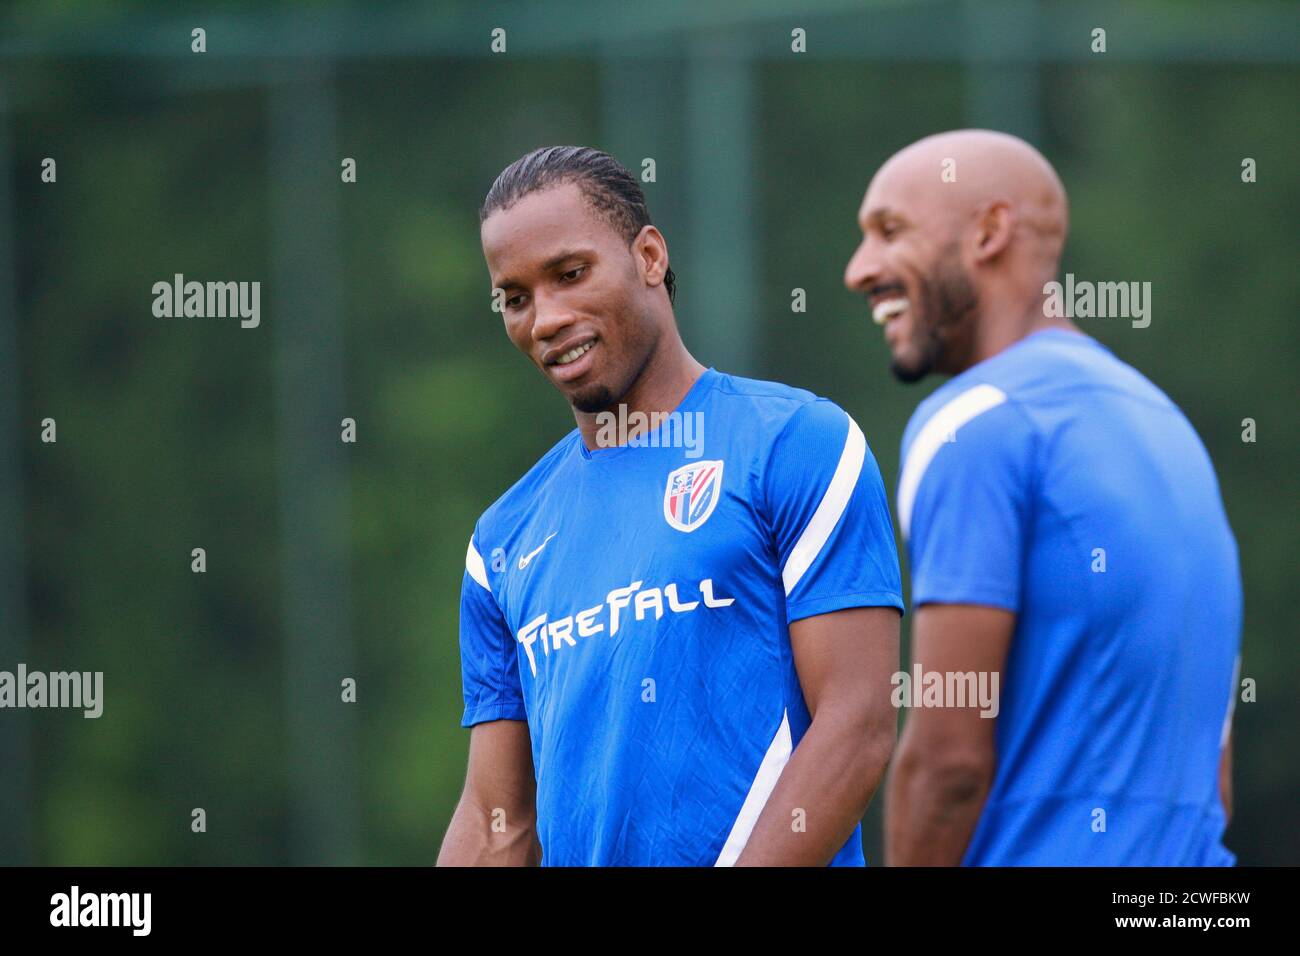 Shanghai Shenhua's Nicolas Anelka of France and his team mate Didier Drogba (L) of Ivory Coast smile during a training session in Shanghai July 16, 2012. Drogba has signed a two-and-a-half-year contract with the big-spending Chinese Super League club for a reported salary of $300,000 a week, ending weeks of speculation on his future after he announced his decision to leave Champions League winners Chelsea. REUTERS/Aly Song (CHINA - Tags: SPORT SOCCER) Stock Photo